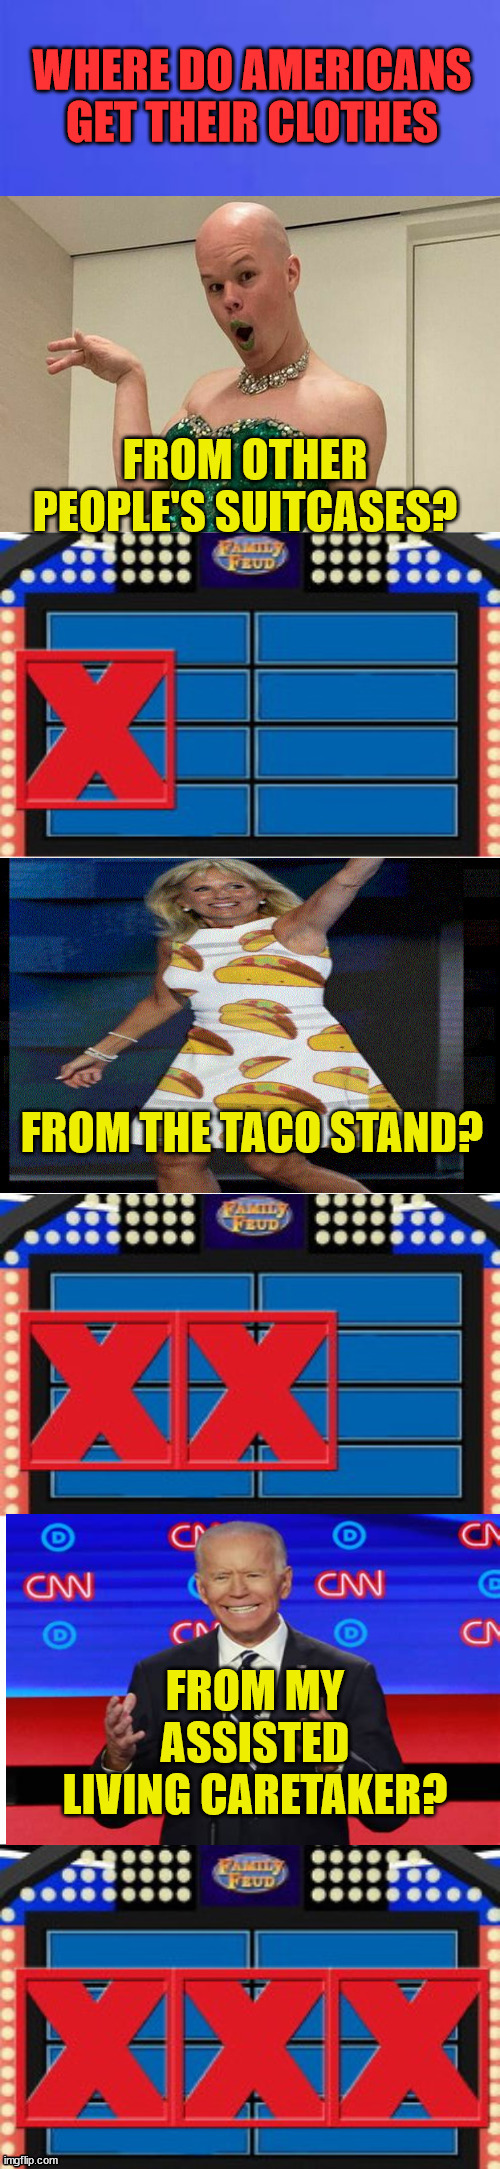 Biden takes on Family Feud... | image tagged in family feud,biden | made w/ Imgflip meme maker